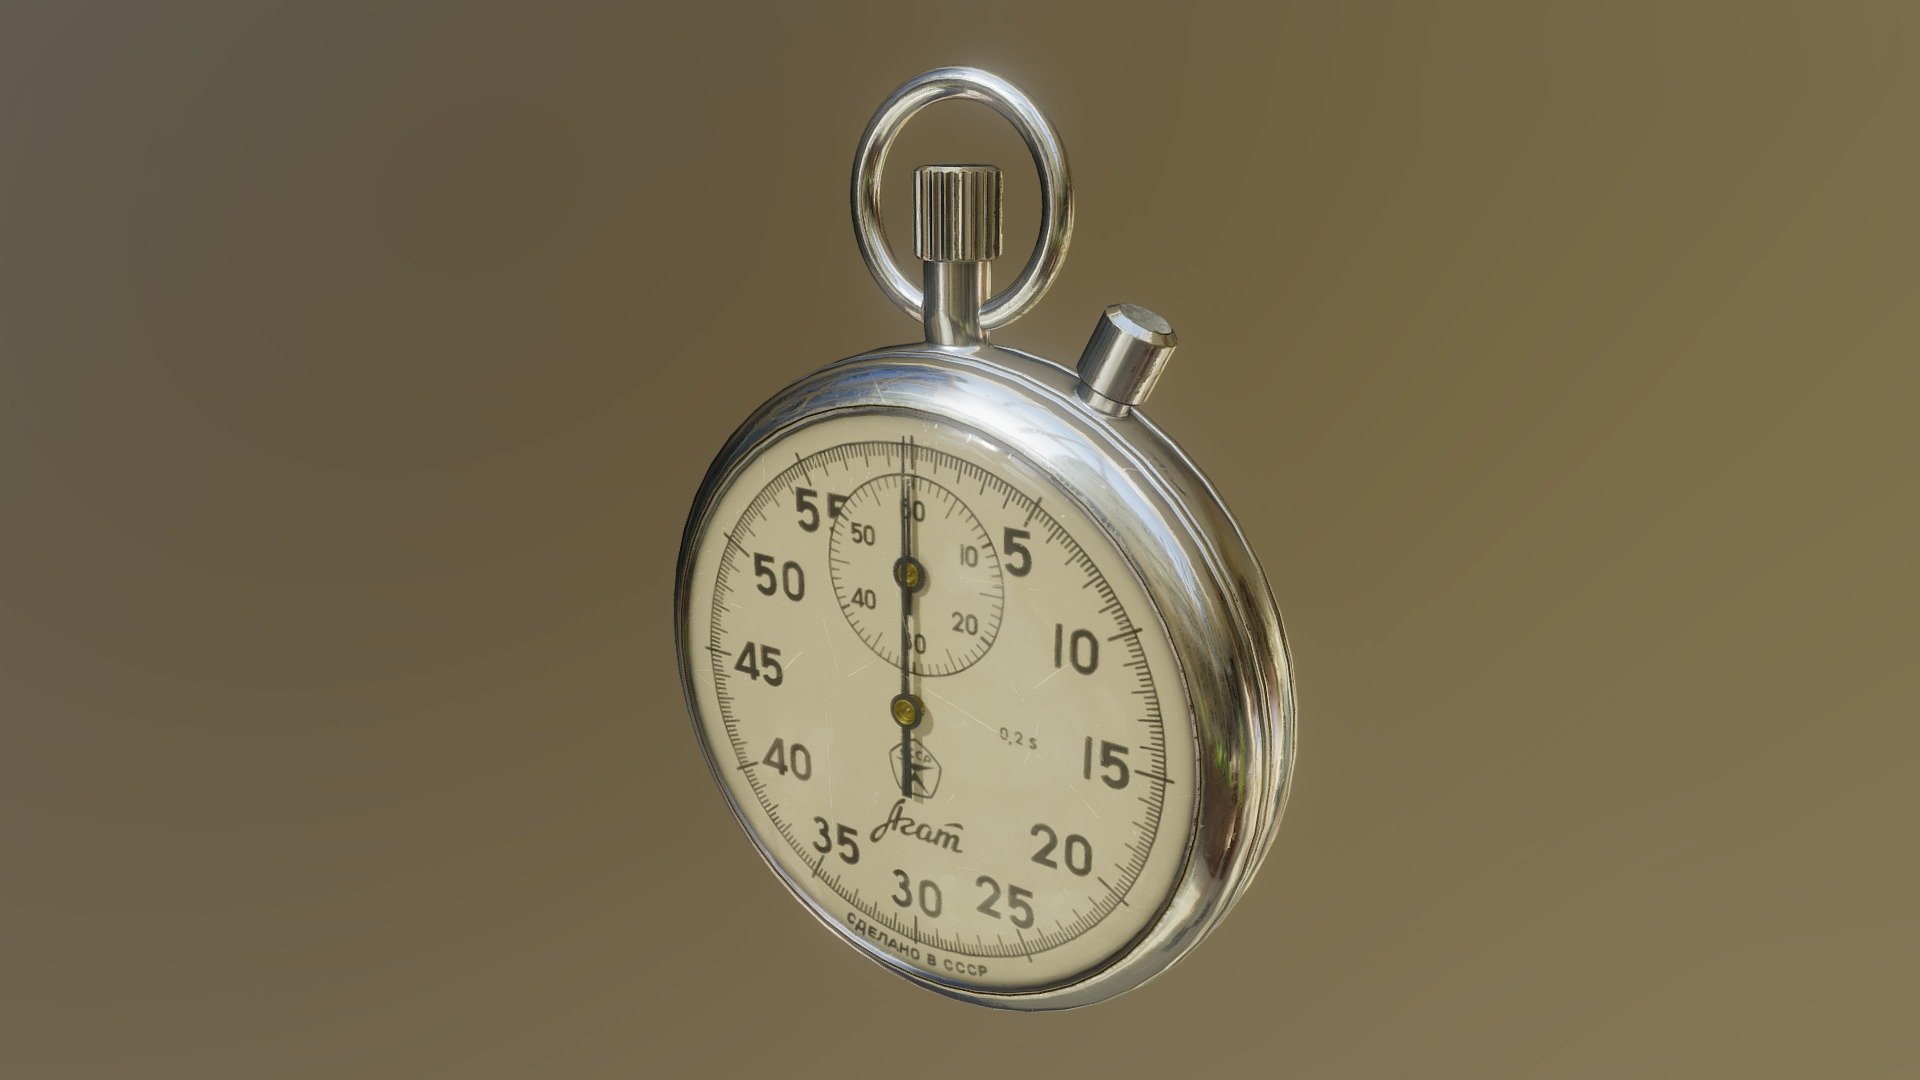 Agat stopwatch was produced in Soviet Union. 
Inspired by my childhood when I played with the same stopwatch 3d model